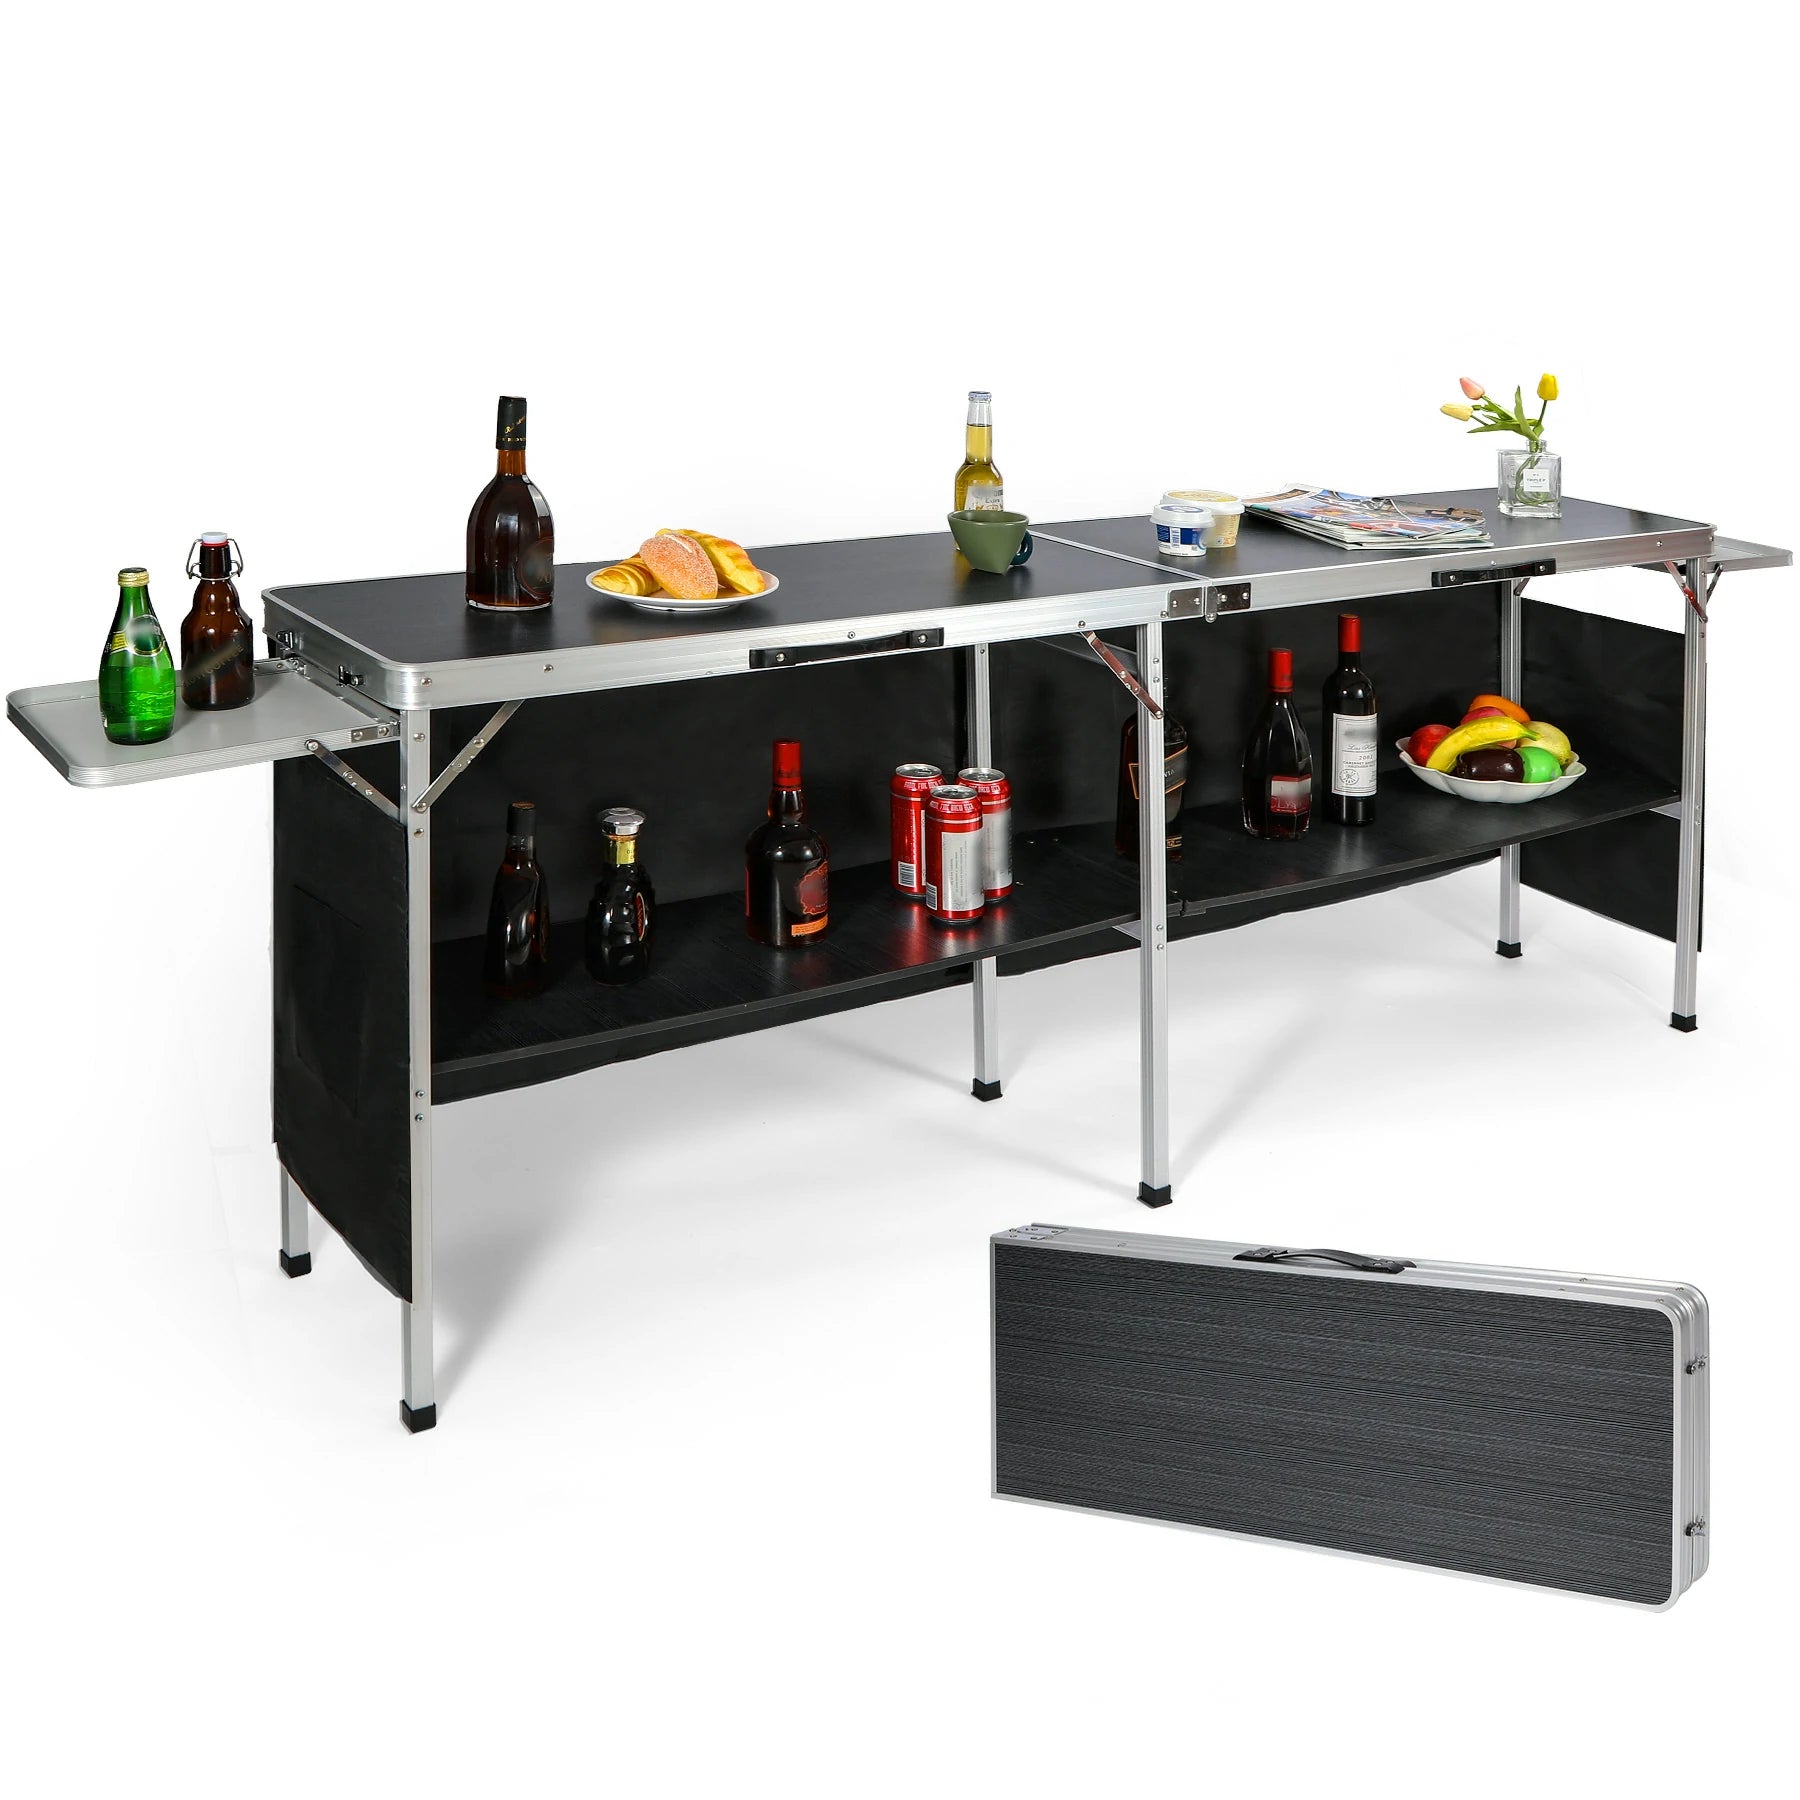 Trademark Innovations 78 in. L x 15 in. W x 36 in. H Portable Bar